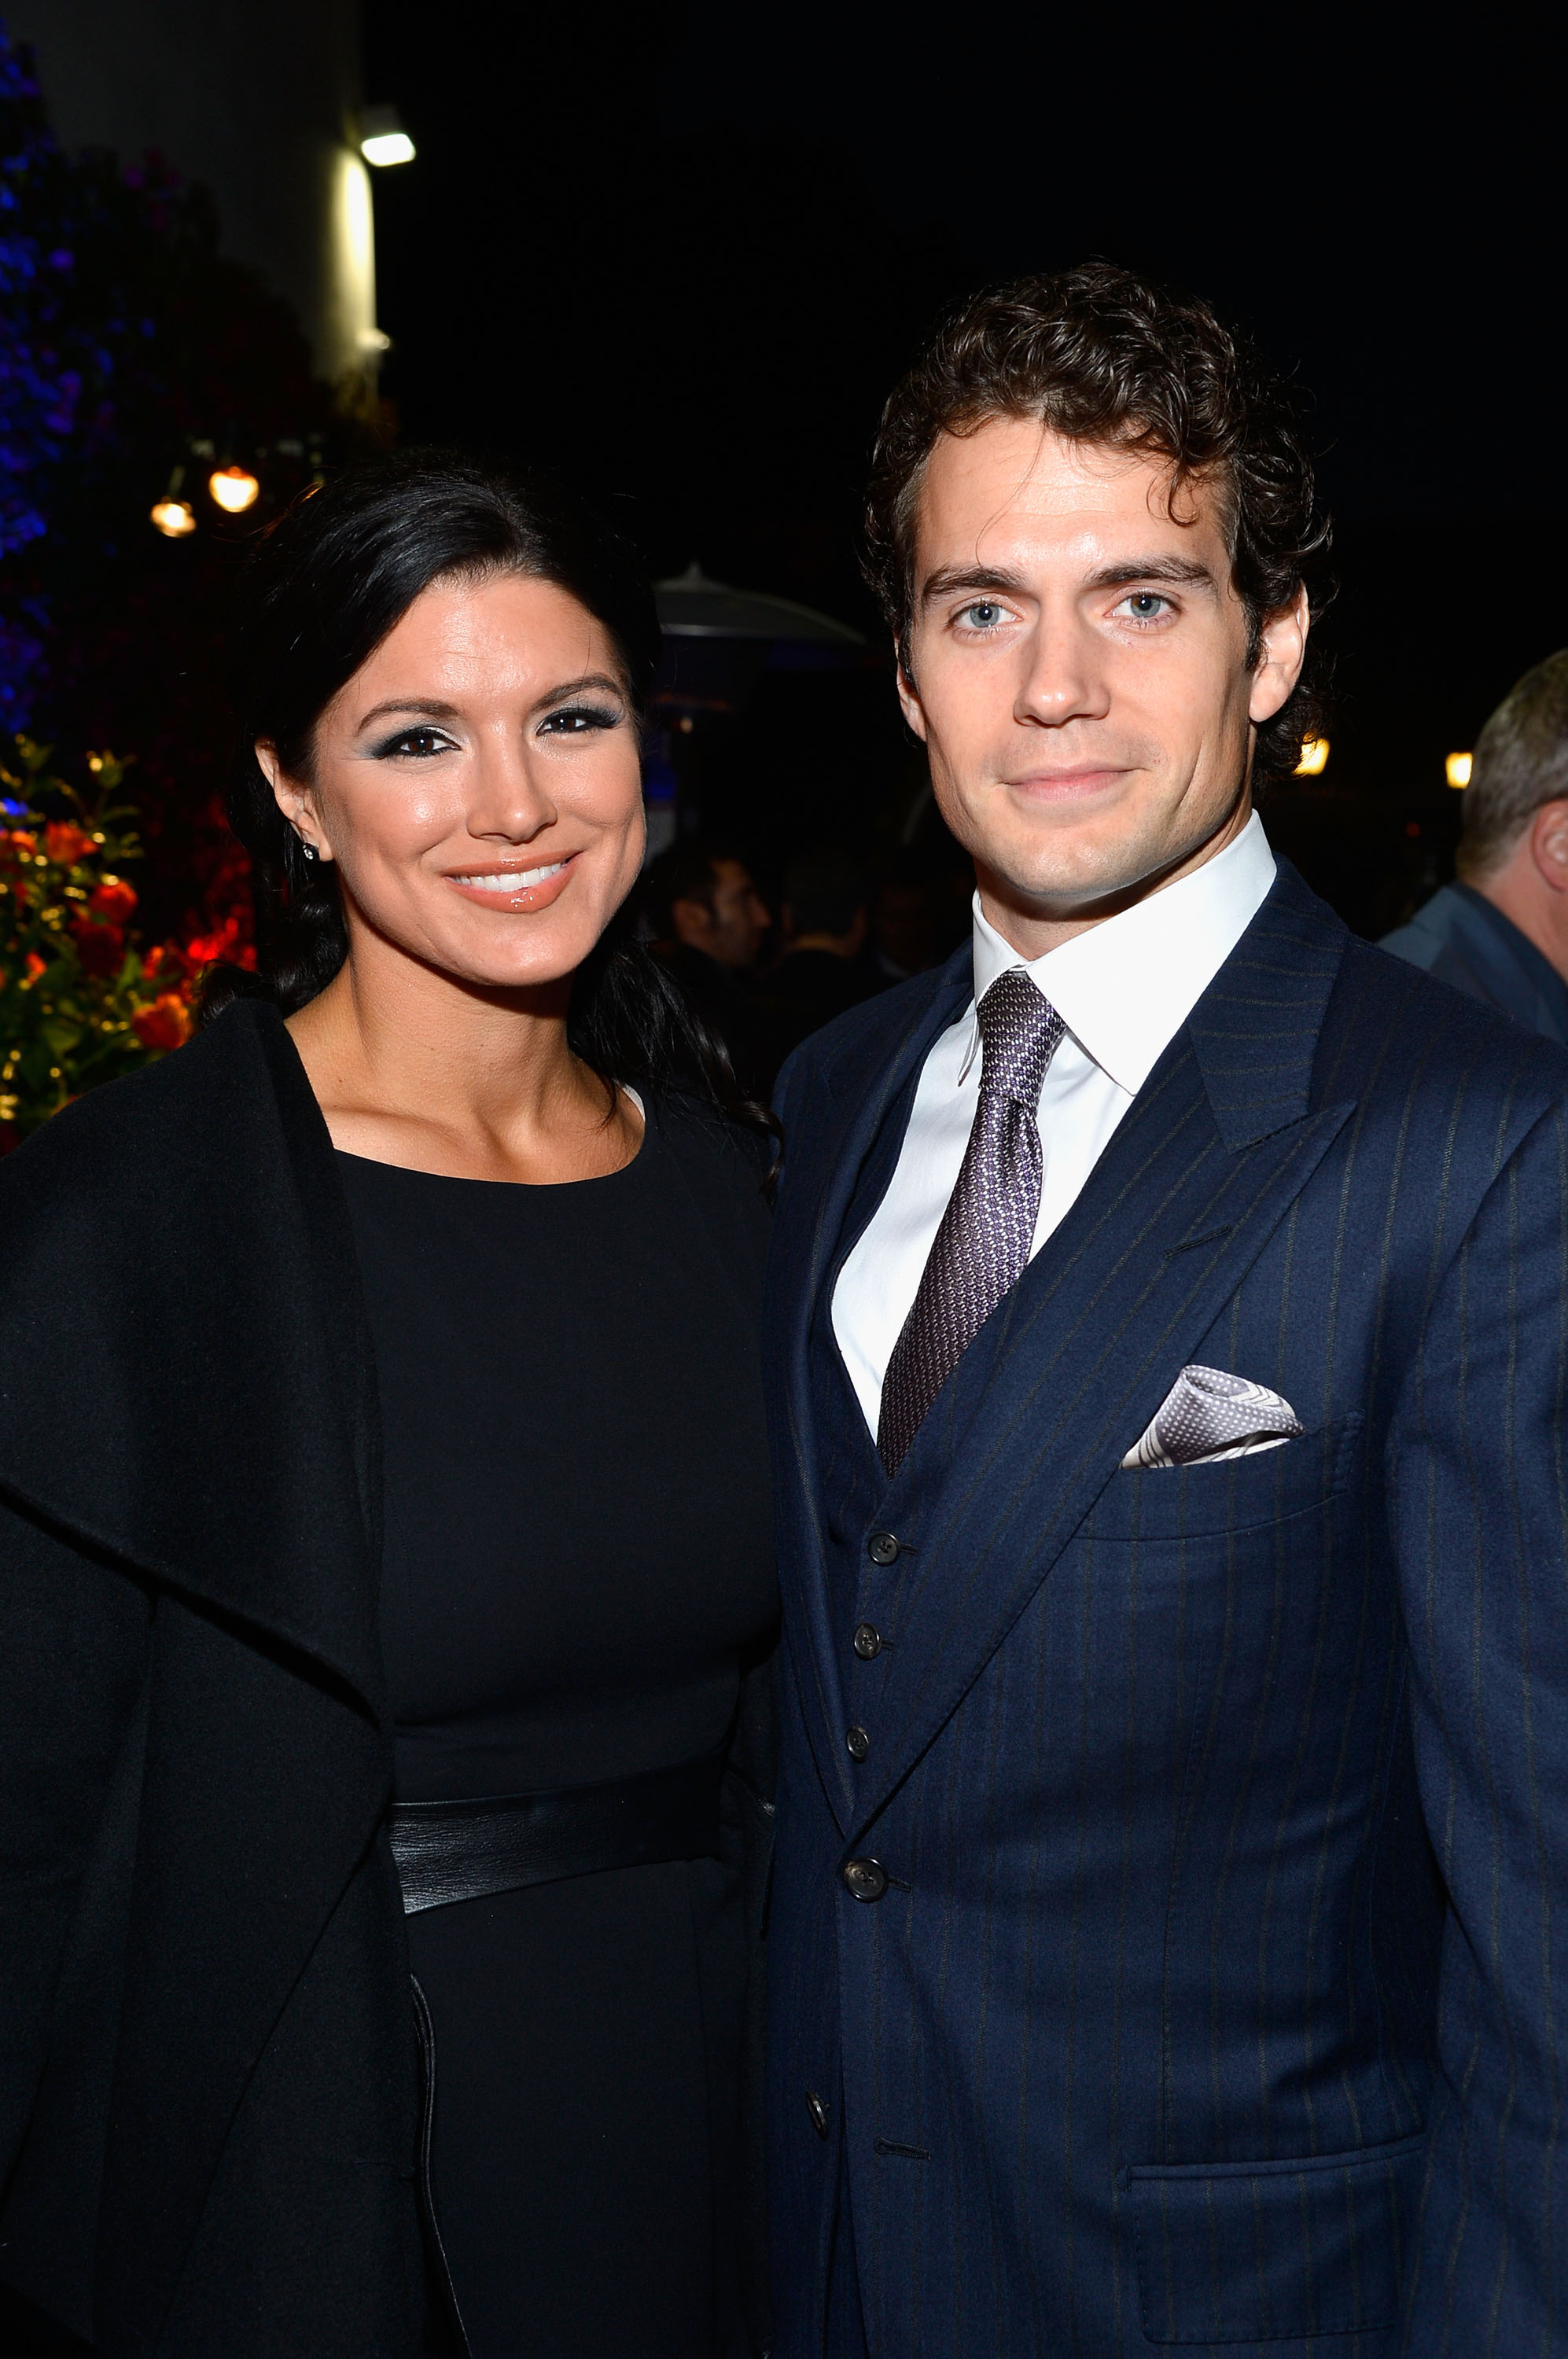 Gina Carano and Henry Cavill at the GREAT British Film Reception on February 22, 2013, in Los Angeles, California | Source: Getty Images